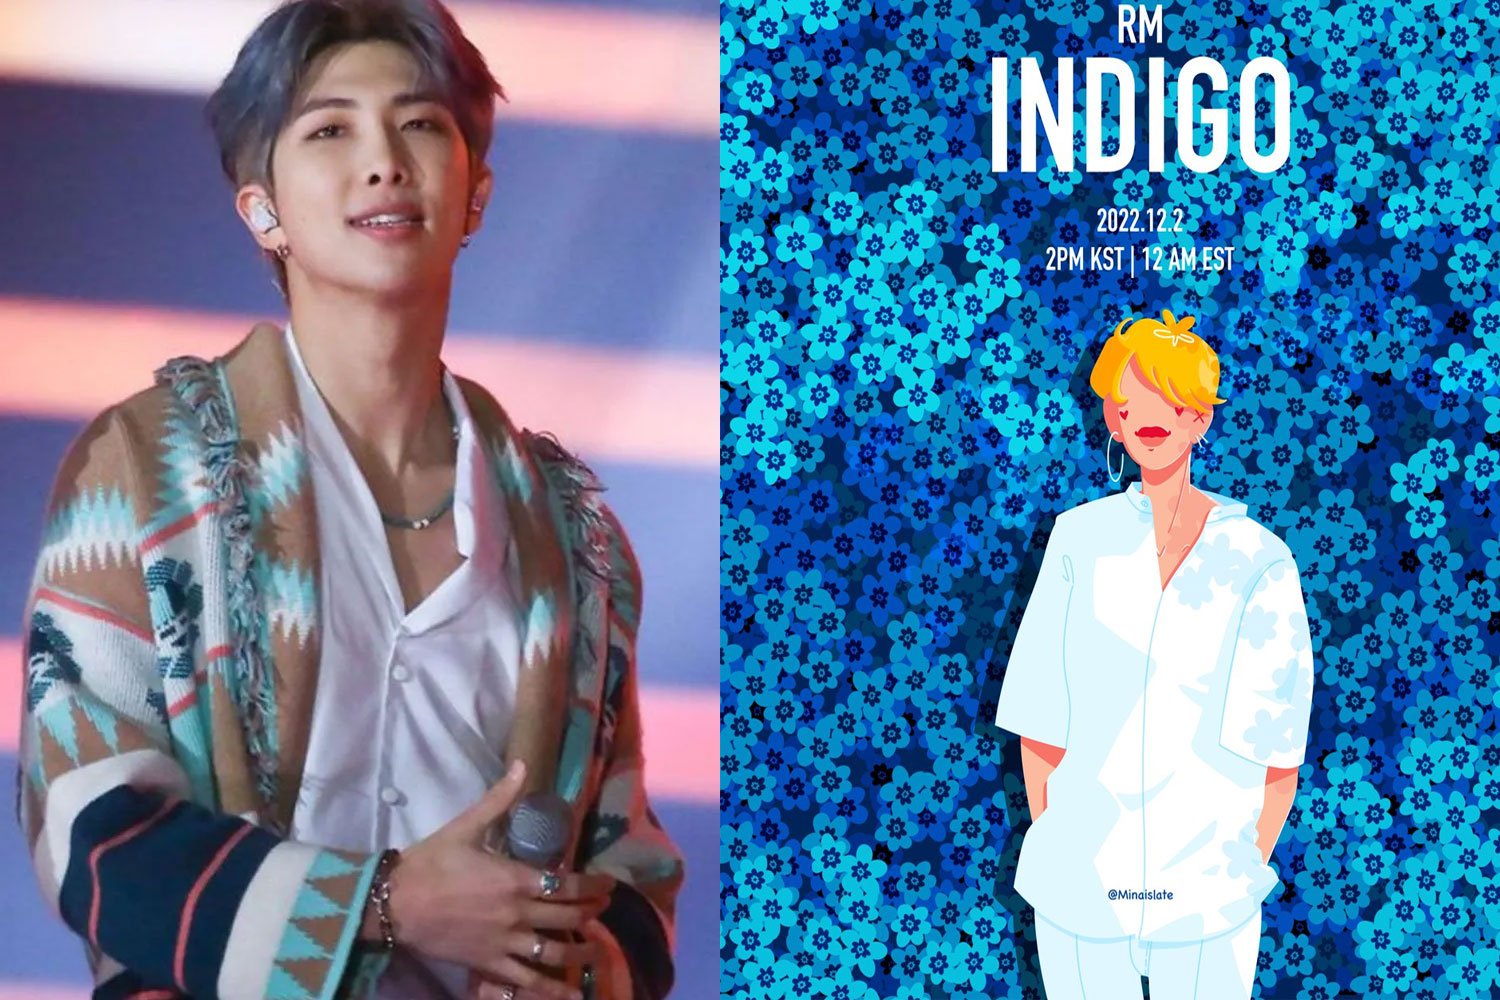 BTS RM shares full track list of ‘Indigo’ contains 10 songs